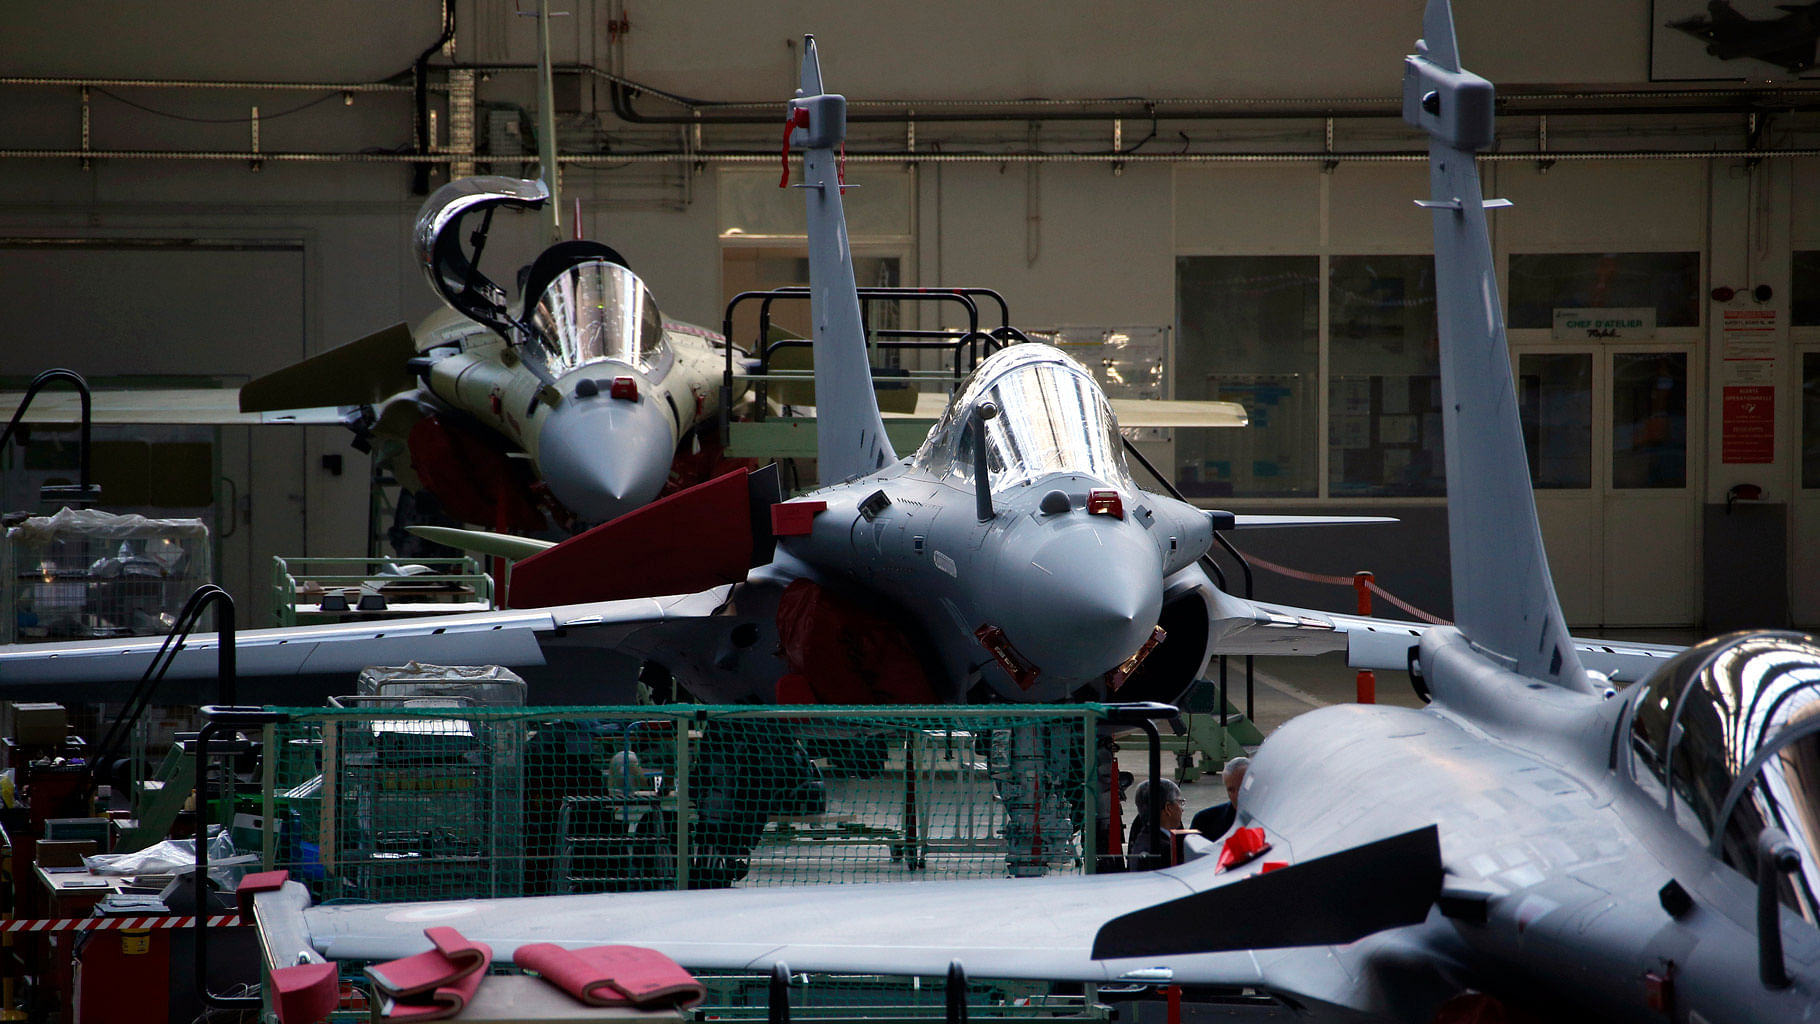 View of the assembly line of the Rafale jet fighter in the factory of French aircraft manufacturer Dassault Aviation, in Merignac near Bordeaux, southwestern France.